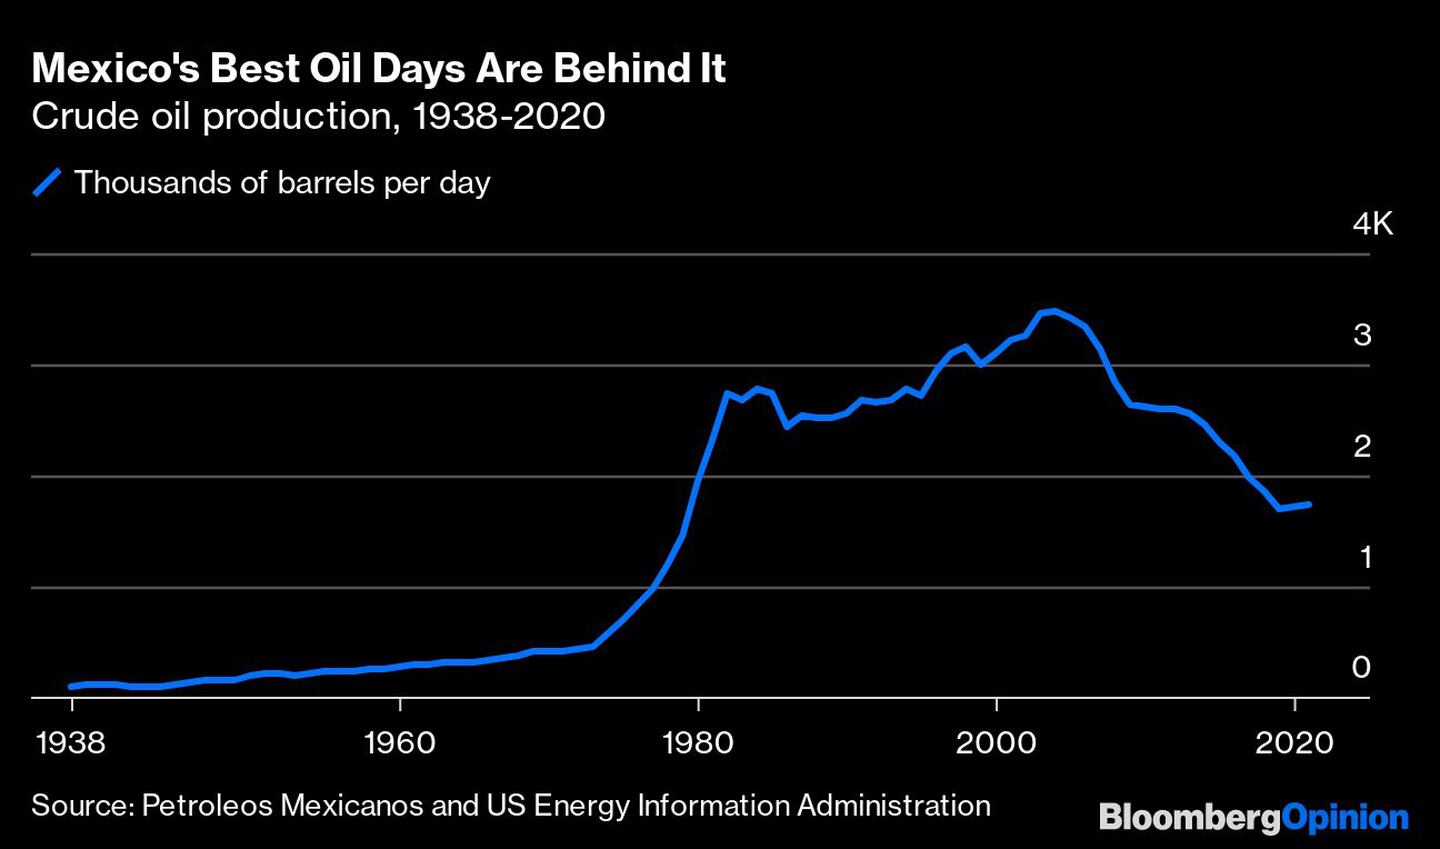 Mexico's Best Oil Days Are Behind It | Crude oil production, 1938-2020dfd